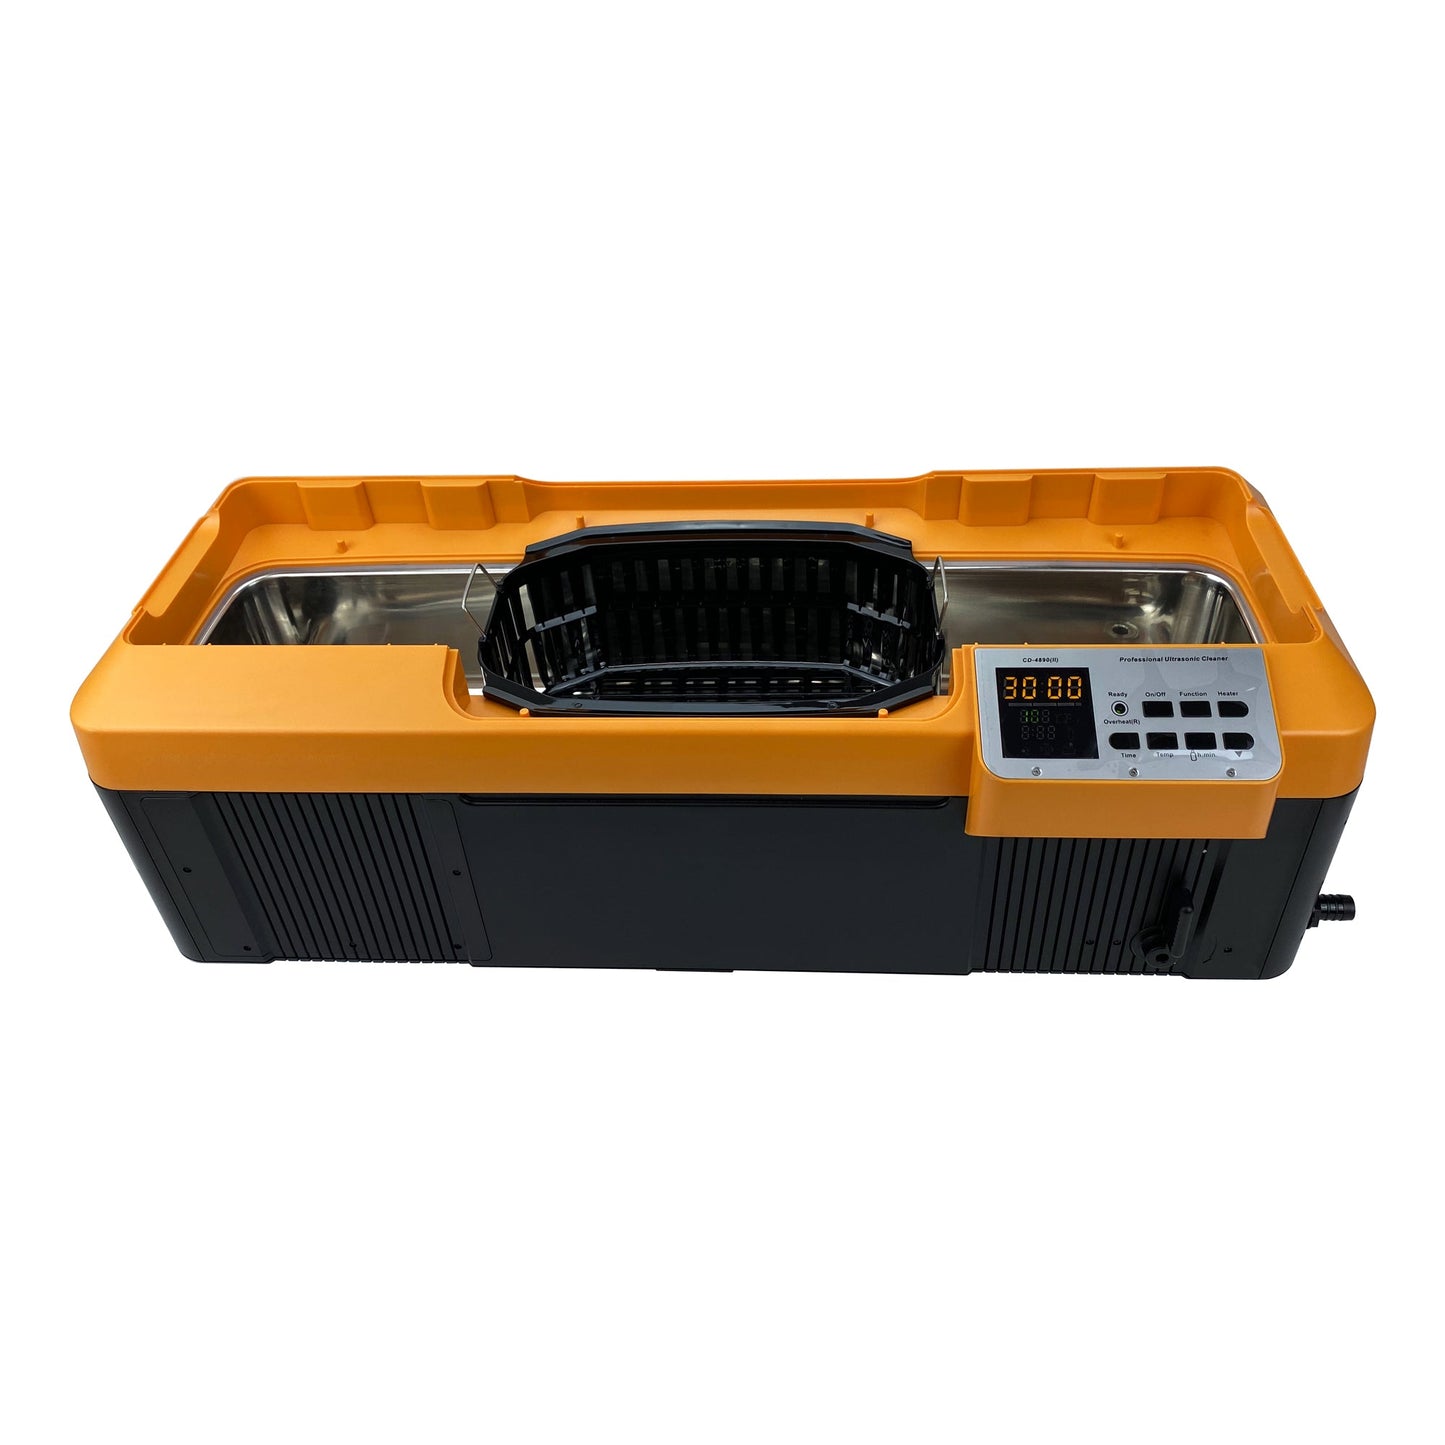 P4890(II) (almost new) | iSonic® Ultrasonic cleaner for AR Uppers, Rifle Barrels, Long Pipes etc. Free Shipping!